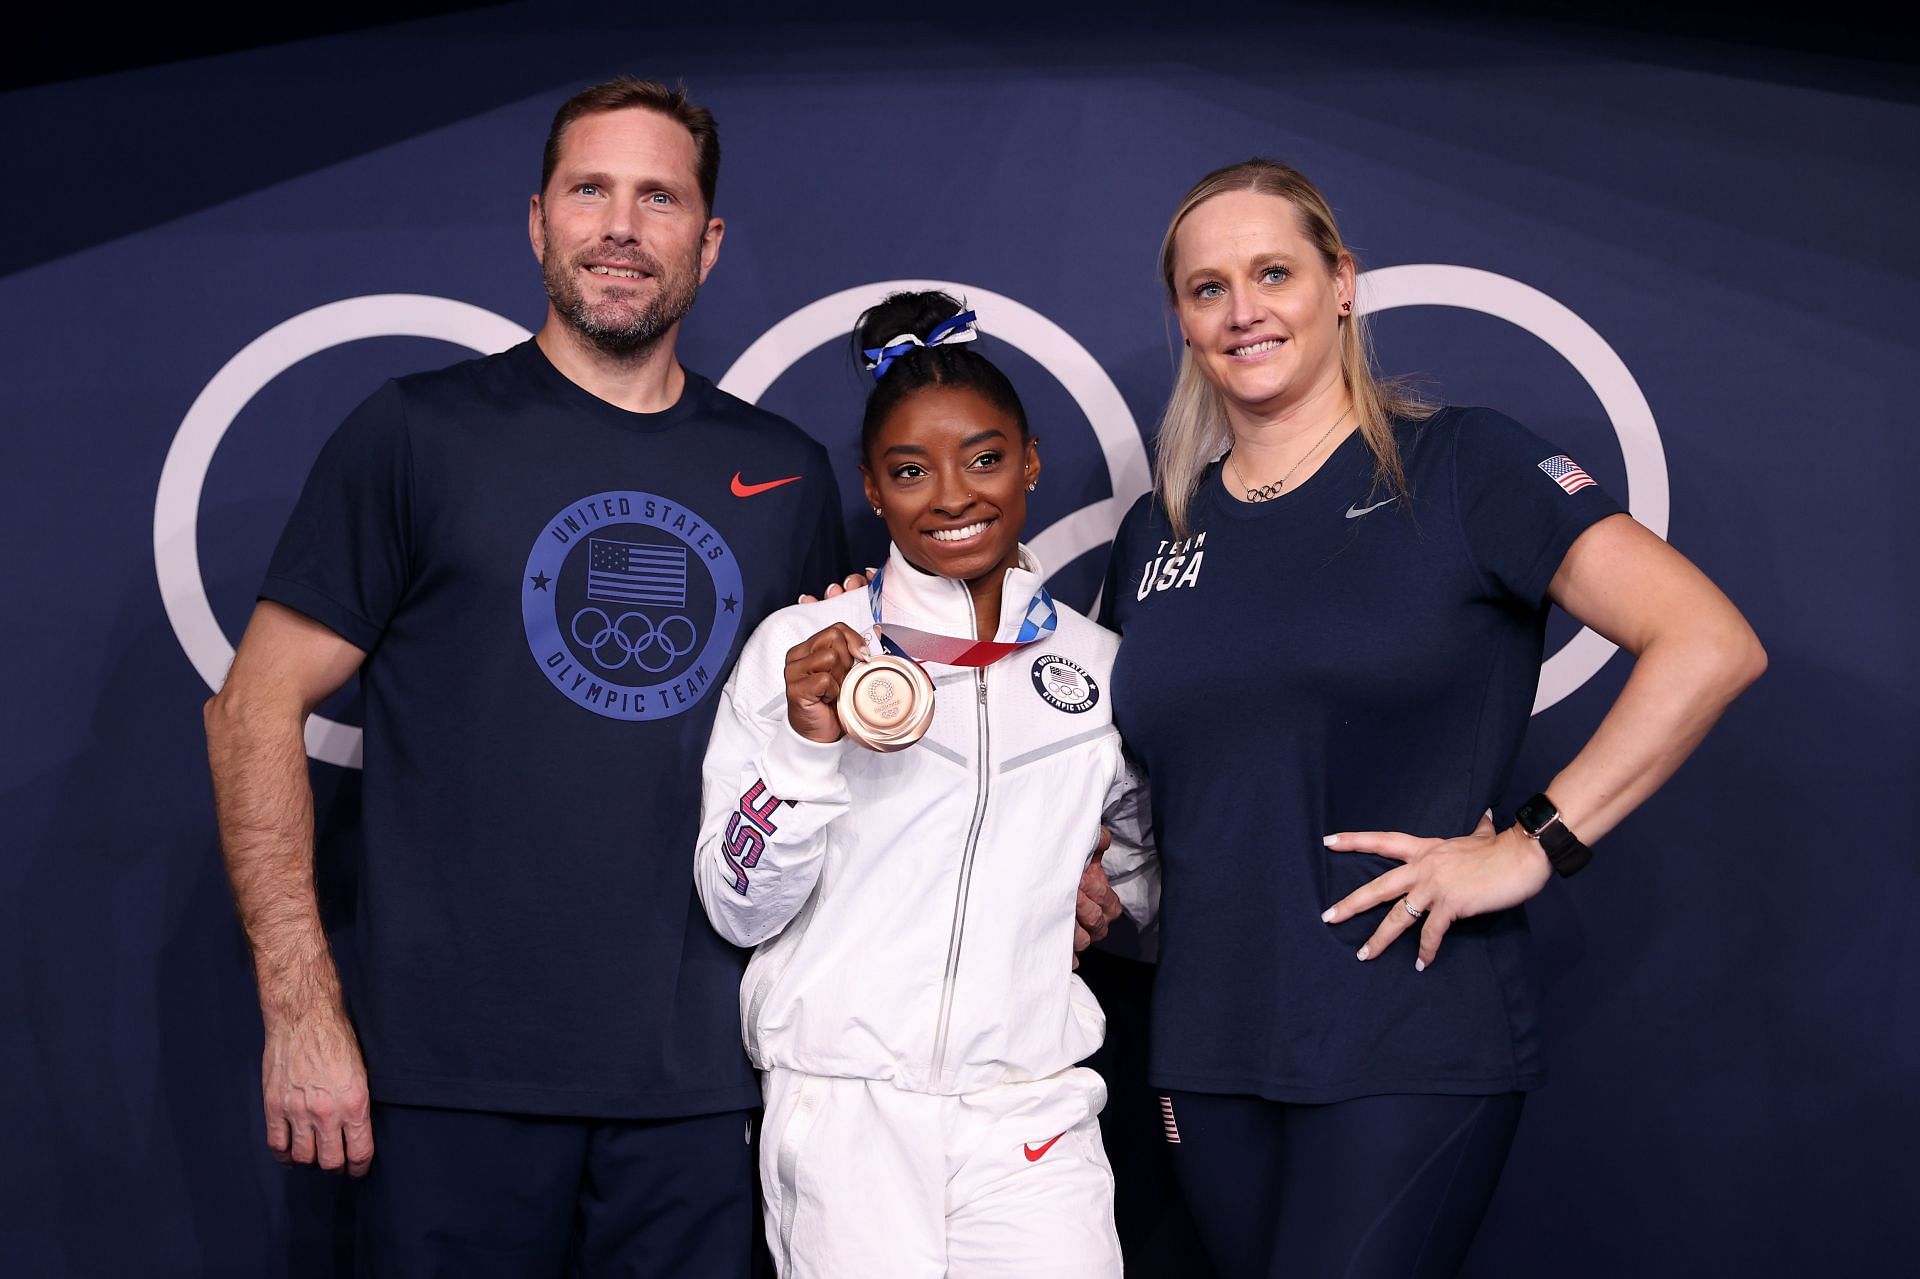 Simone Biles of Team United States poses with the bronze medal alongside coaches Laurent Landi and Cecile Canqueteau-Landi following the Women&#039;s Balance Beam Final at the 2020 Olympic Games in Tokyo, Japan Gymnastics.